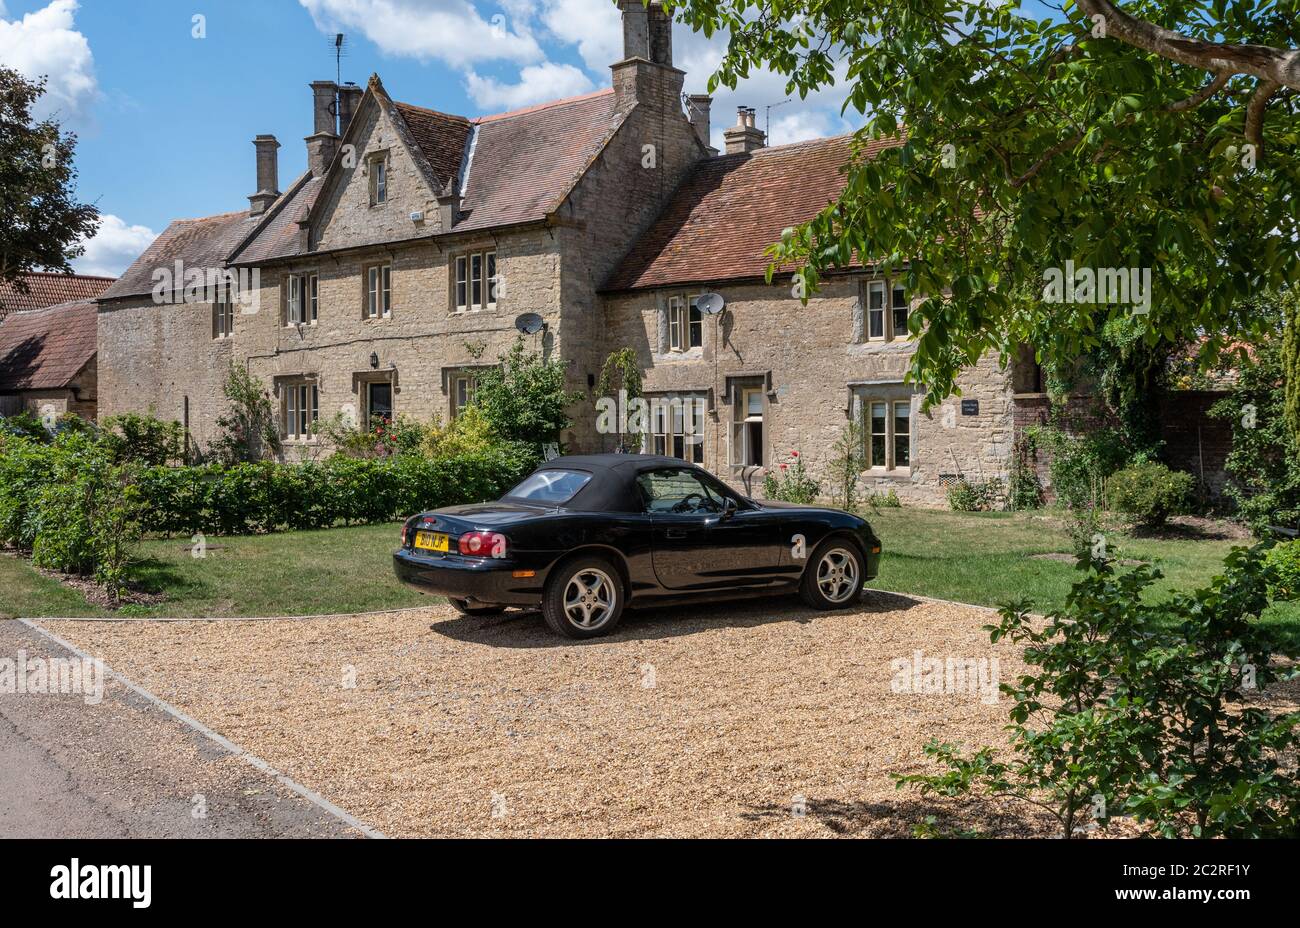 A traditional English country scene, a sports car parked in front of old stone cottages; Castle Ashby, Northamptonshire, UK Stock Photo